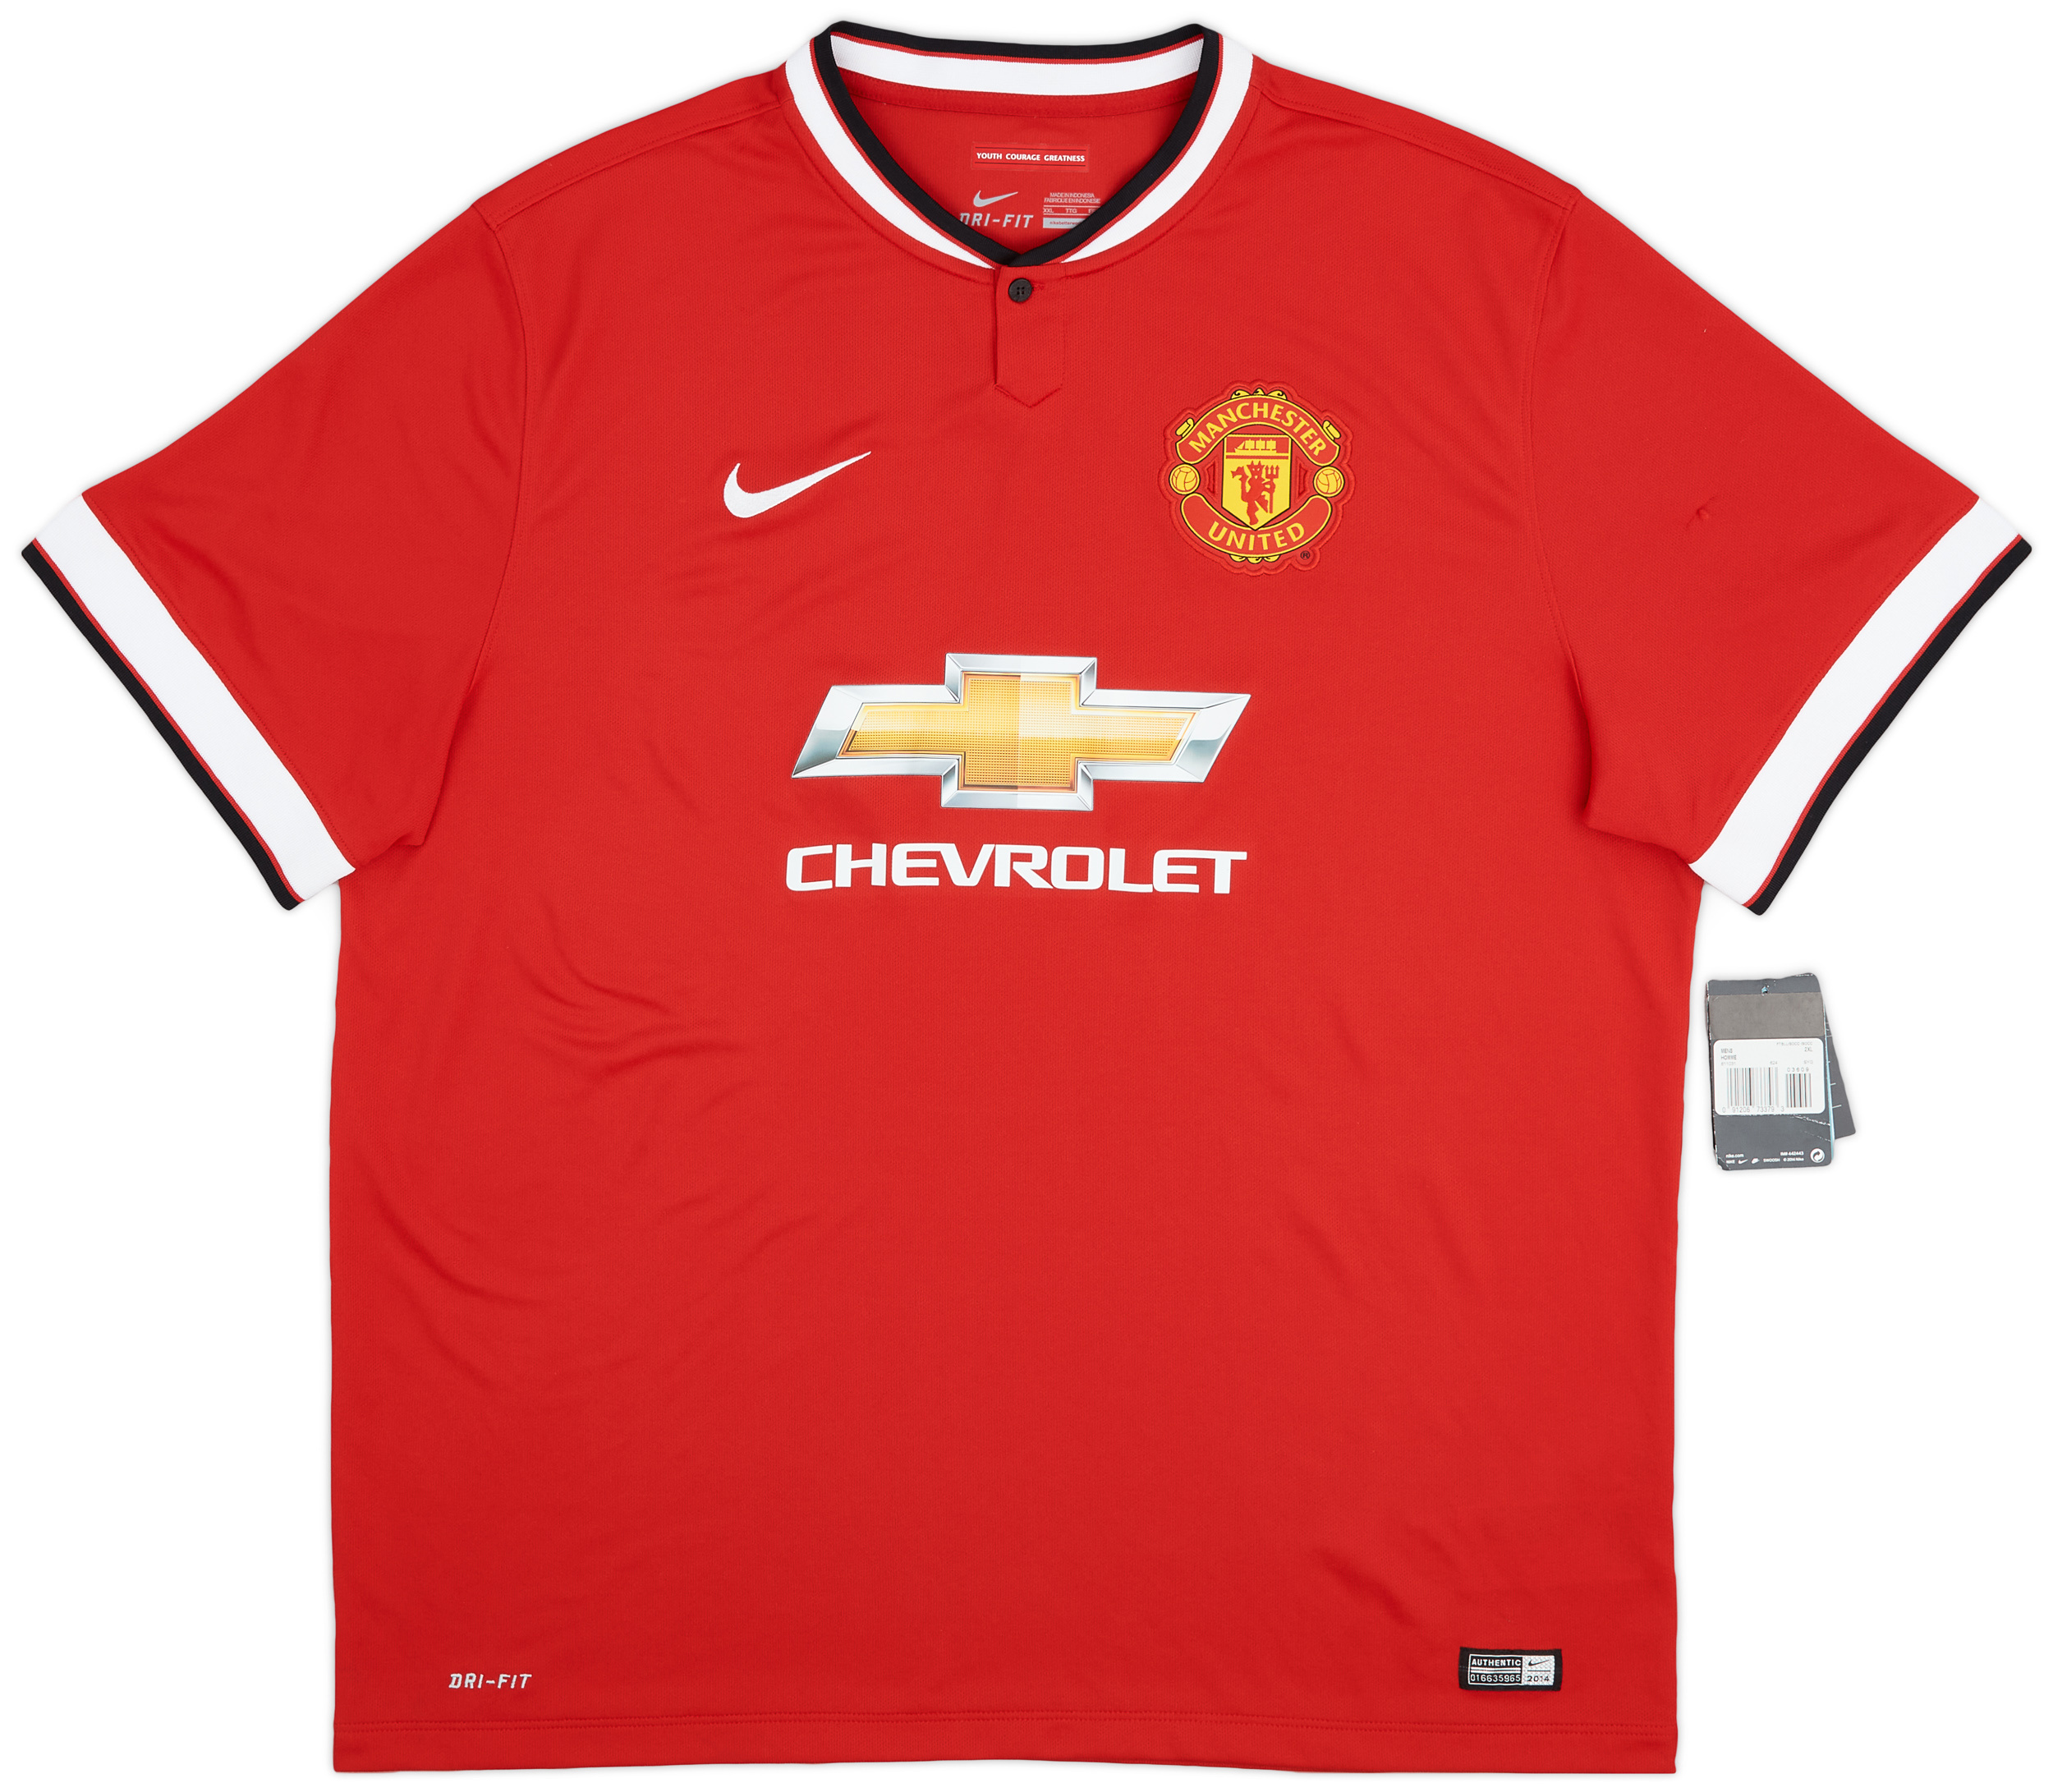 2014-15 Manchester United Home Shirt ()